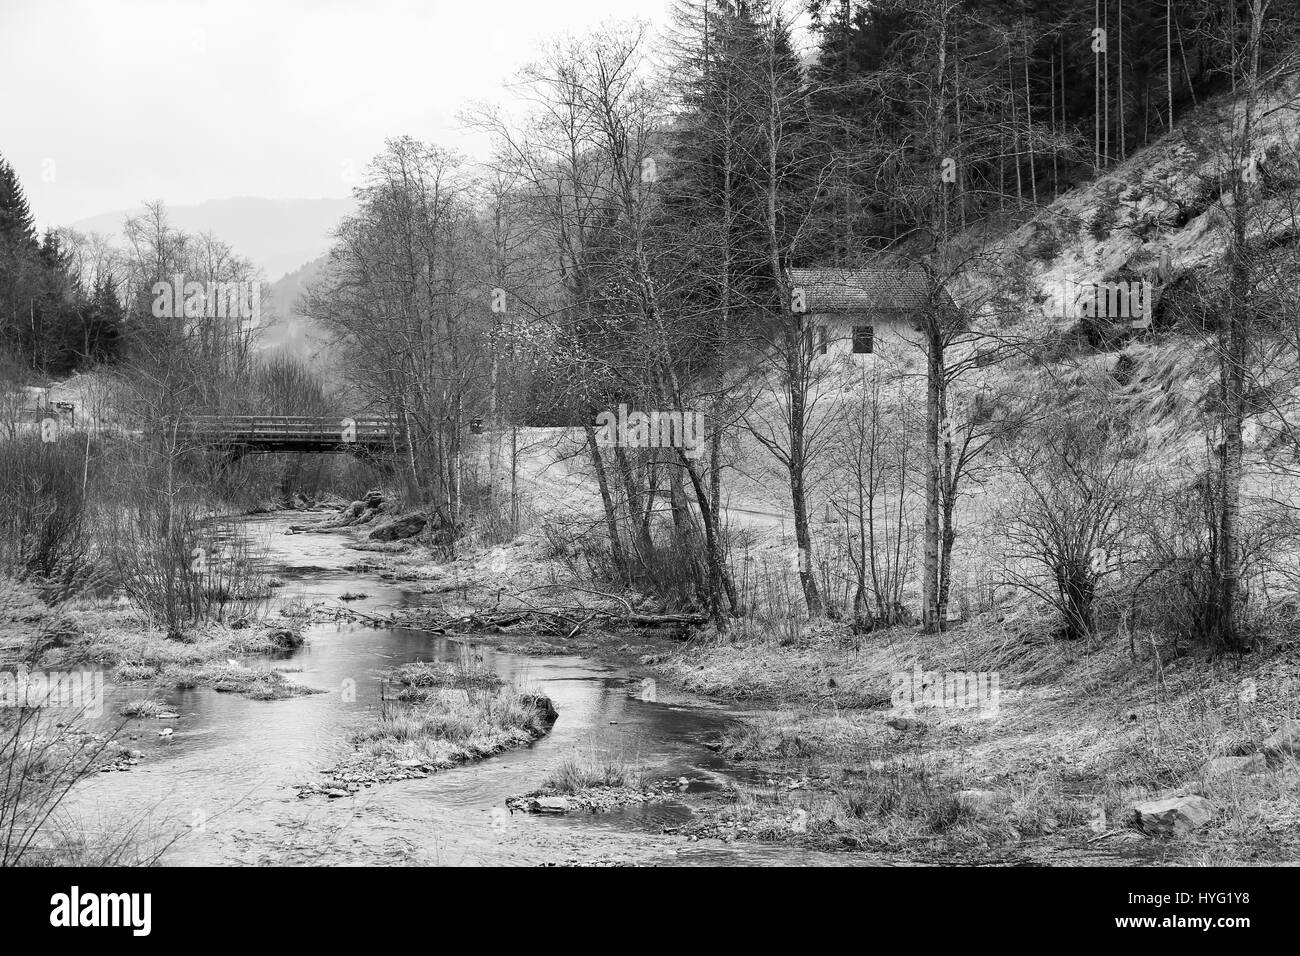 Sankt Walburg, Italy - March 22, 2017: The river Falschauer in the Ulten Valley in South Tyrol. The picture is monochrome. Stock Photo